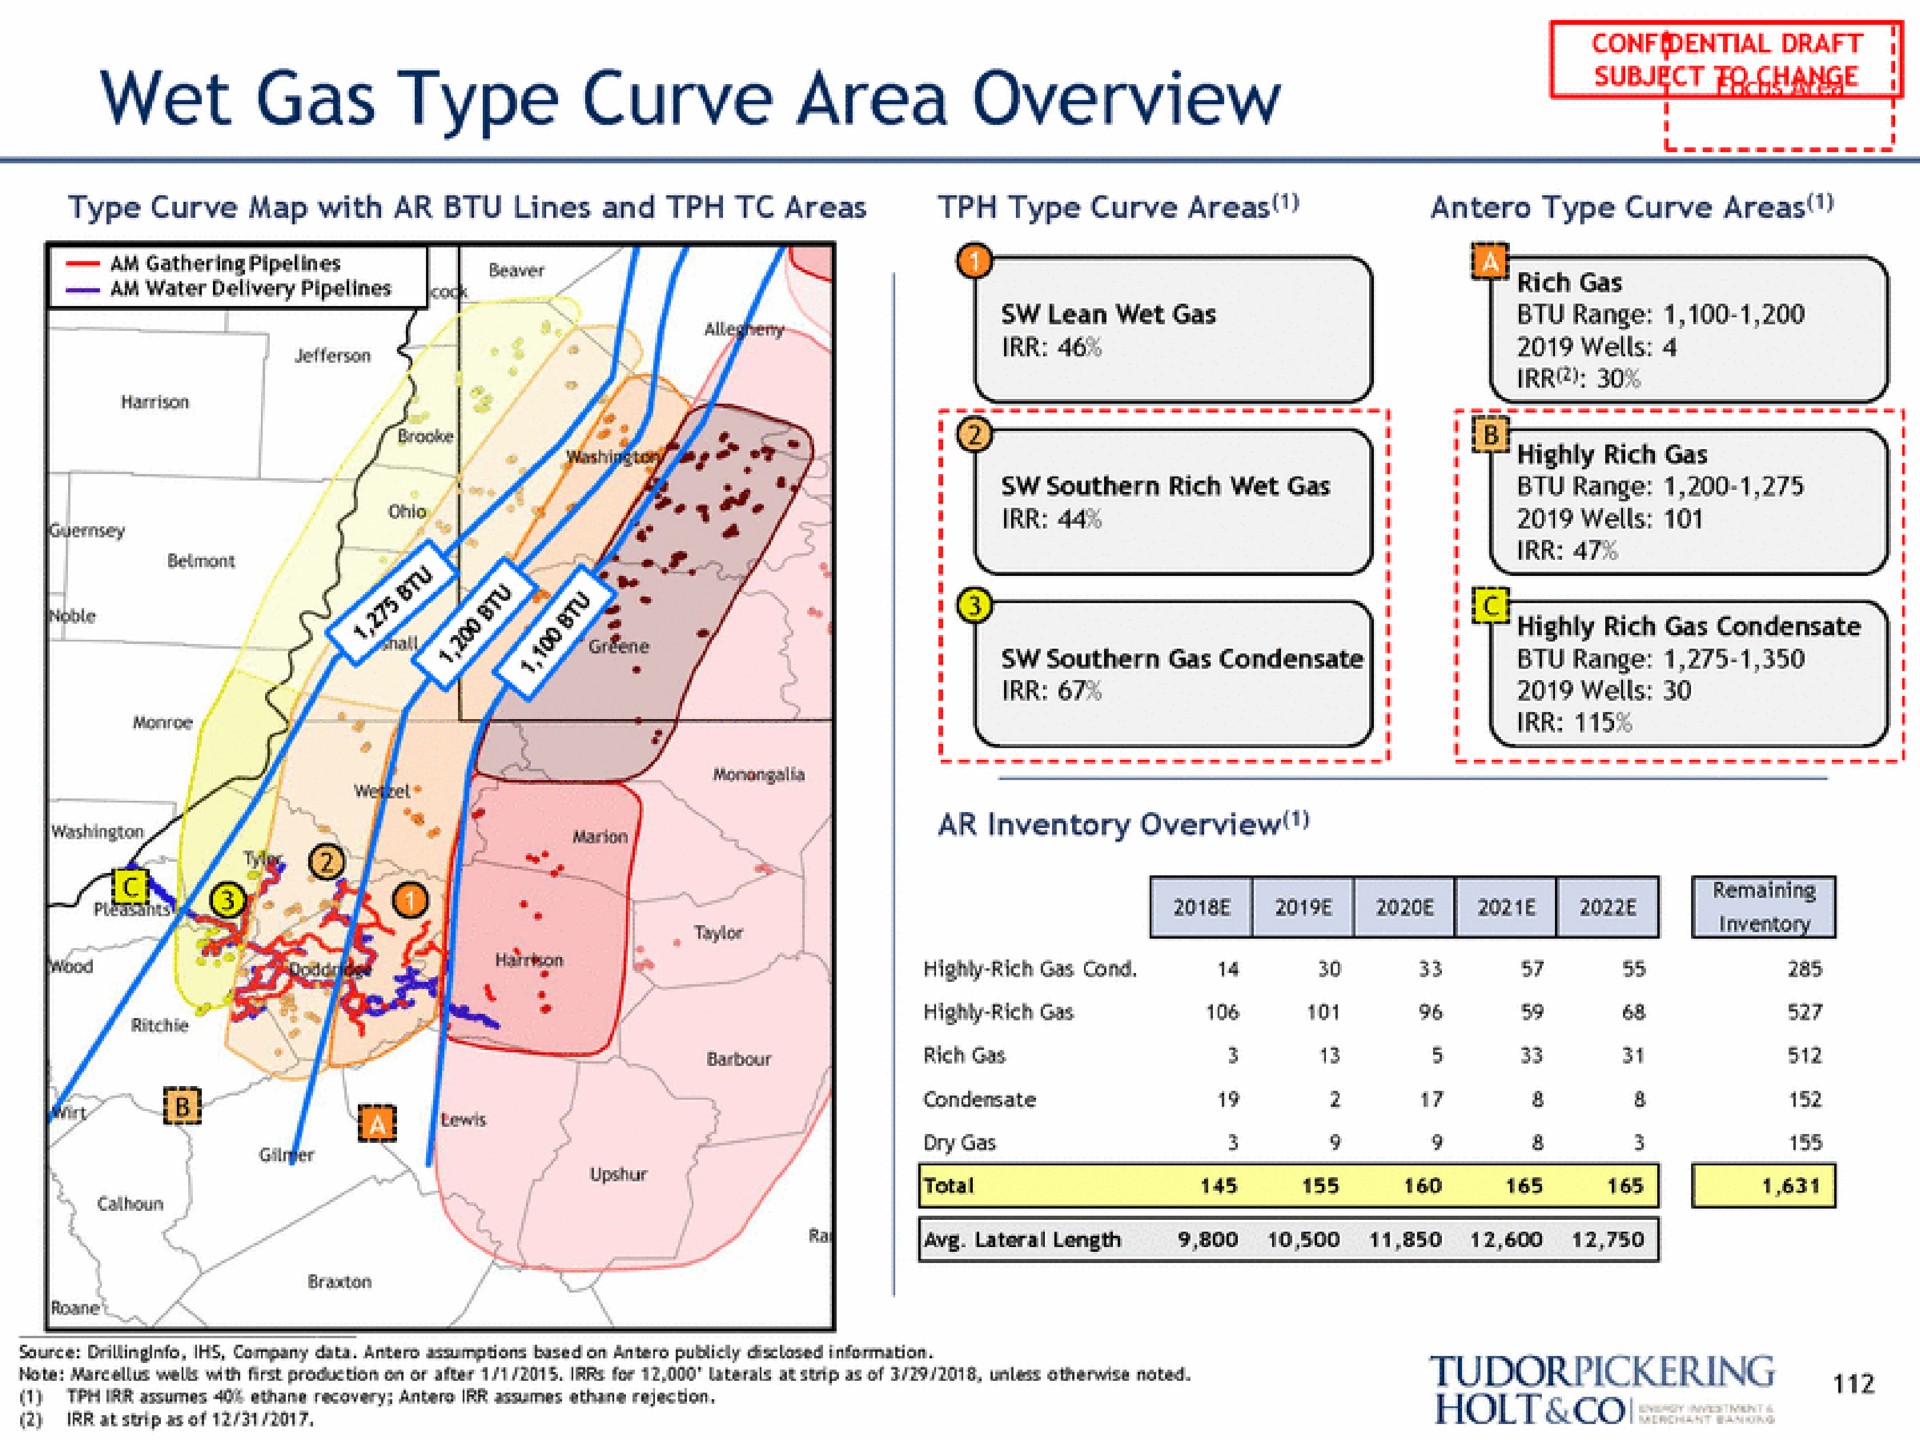 wet gas type curve area overview | Tudor, Pickering, Holt & Co